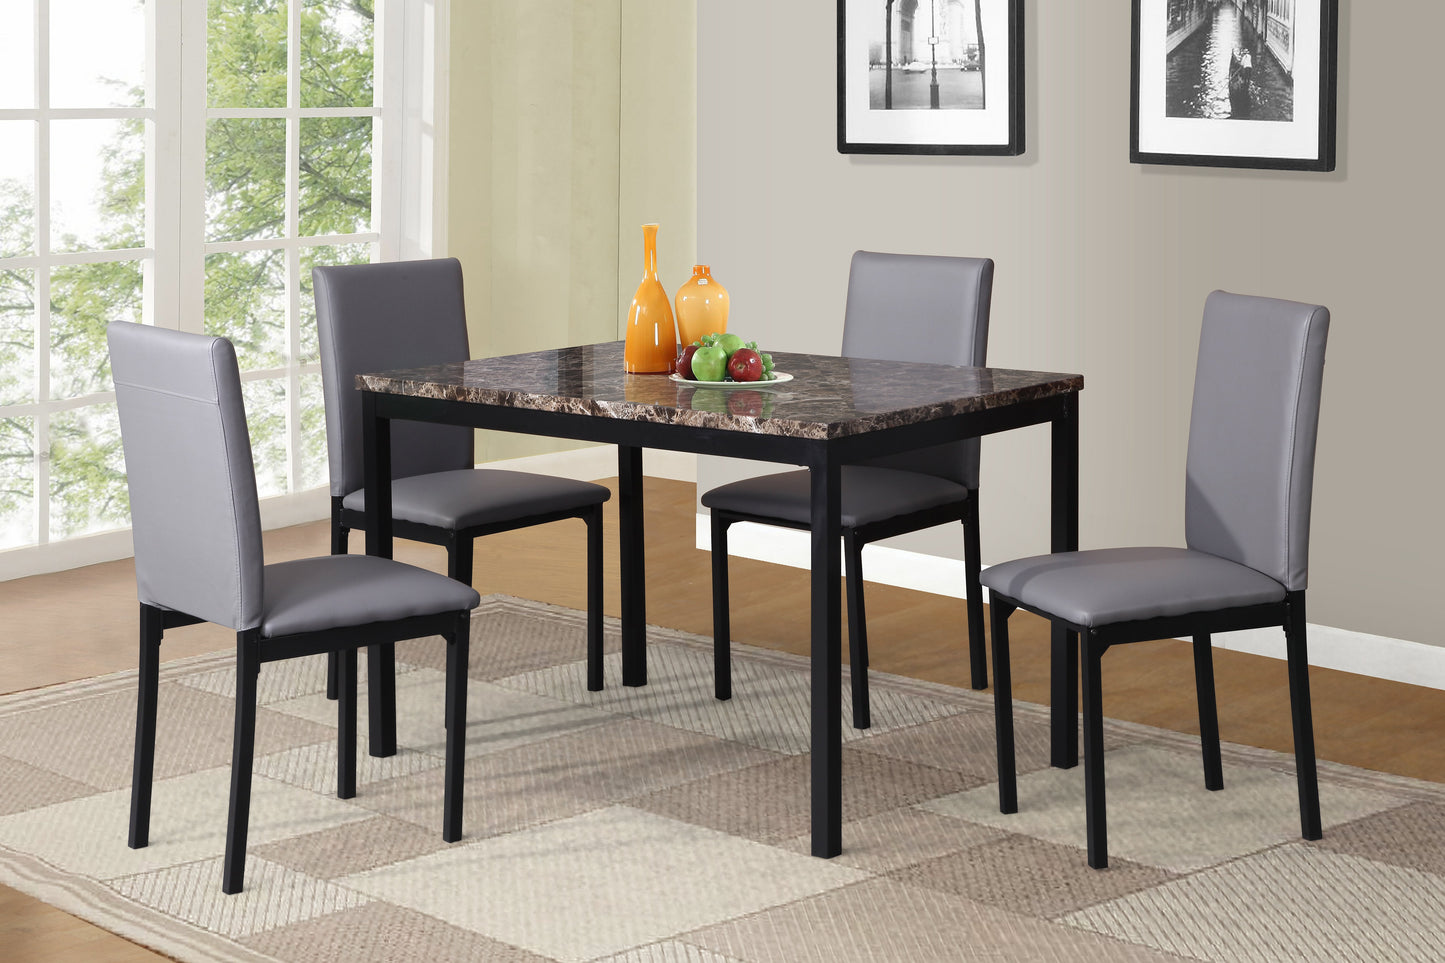 Noyes Faux Leather Seat Metal Frame Gray Dining Chairs , Set of 4